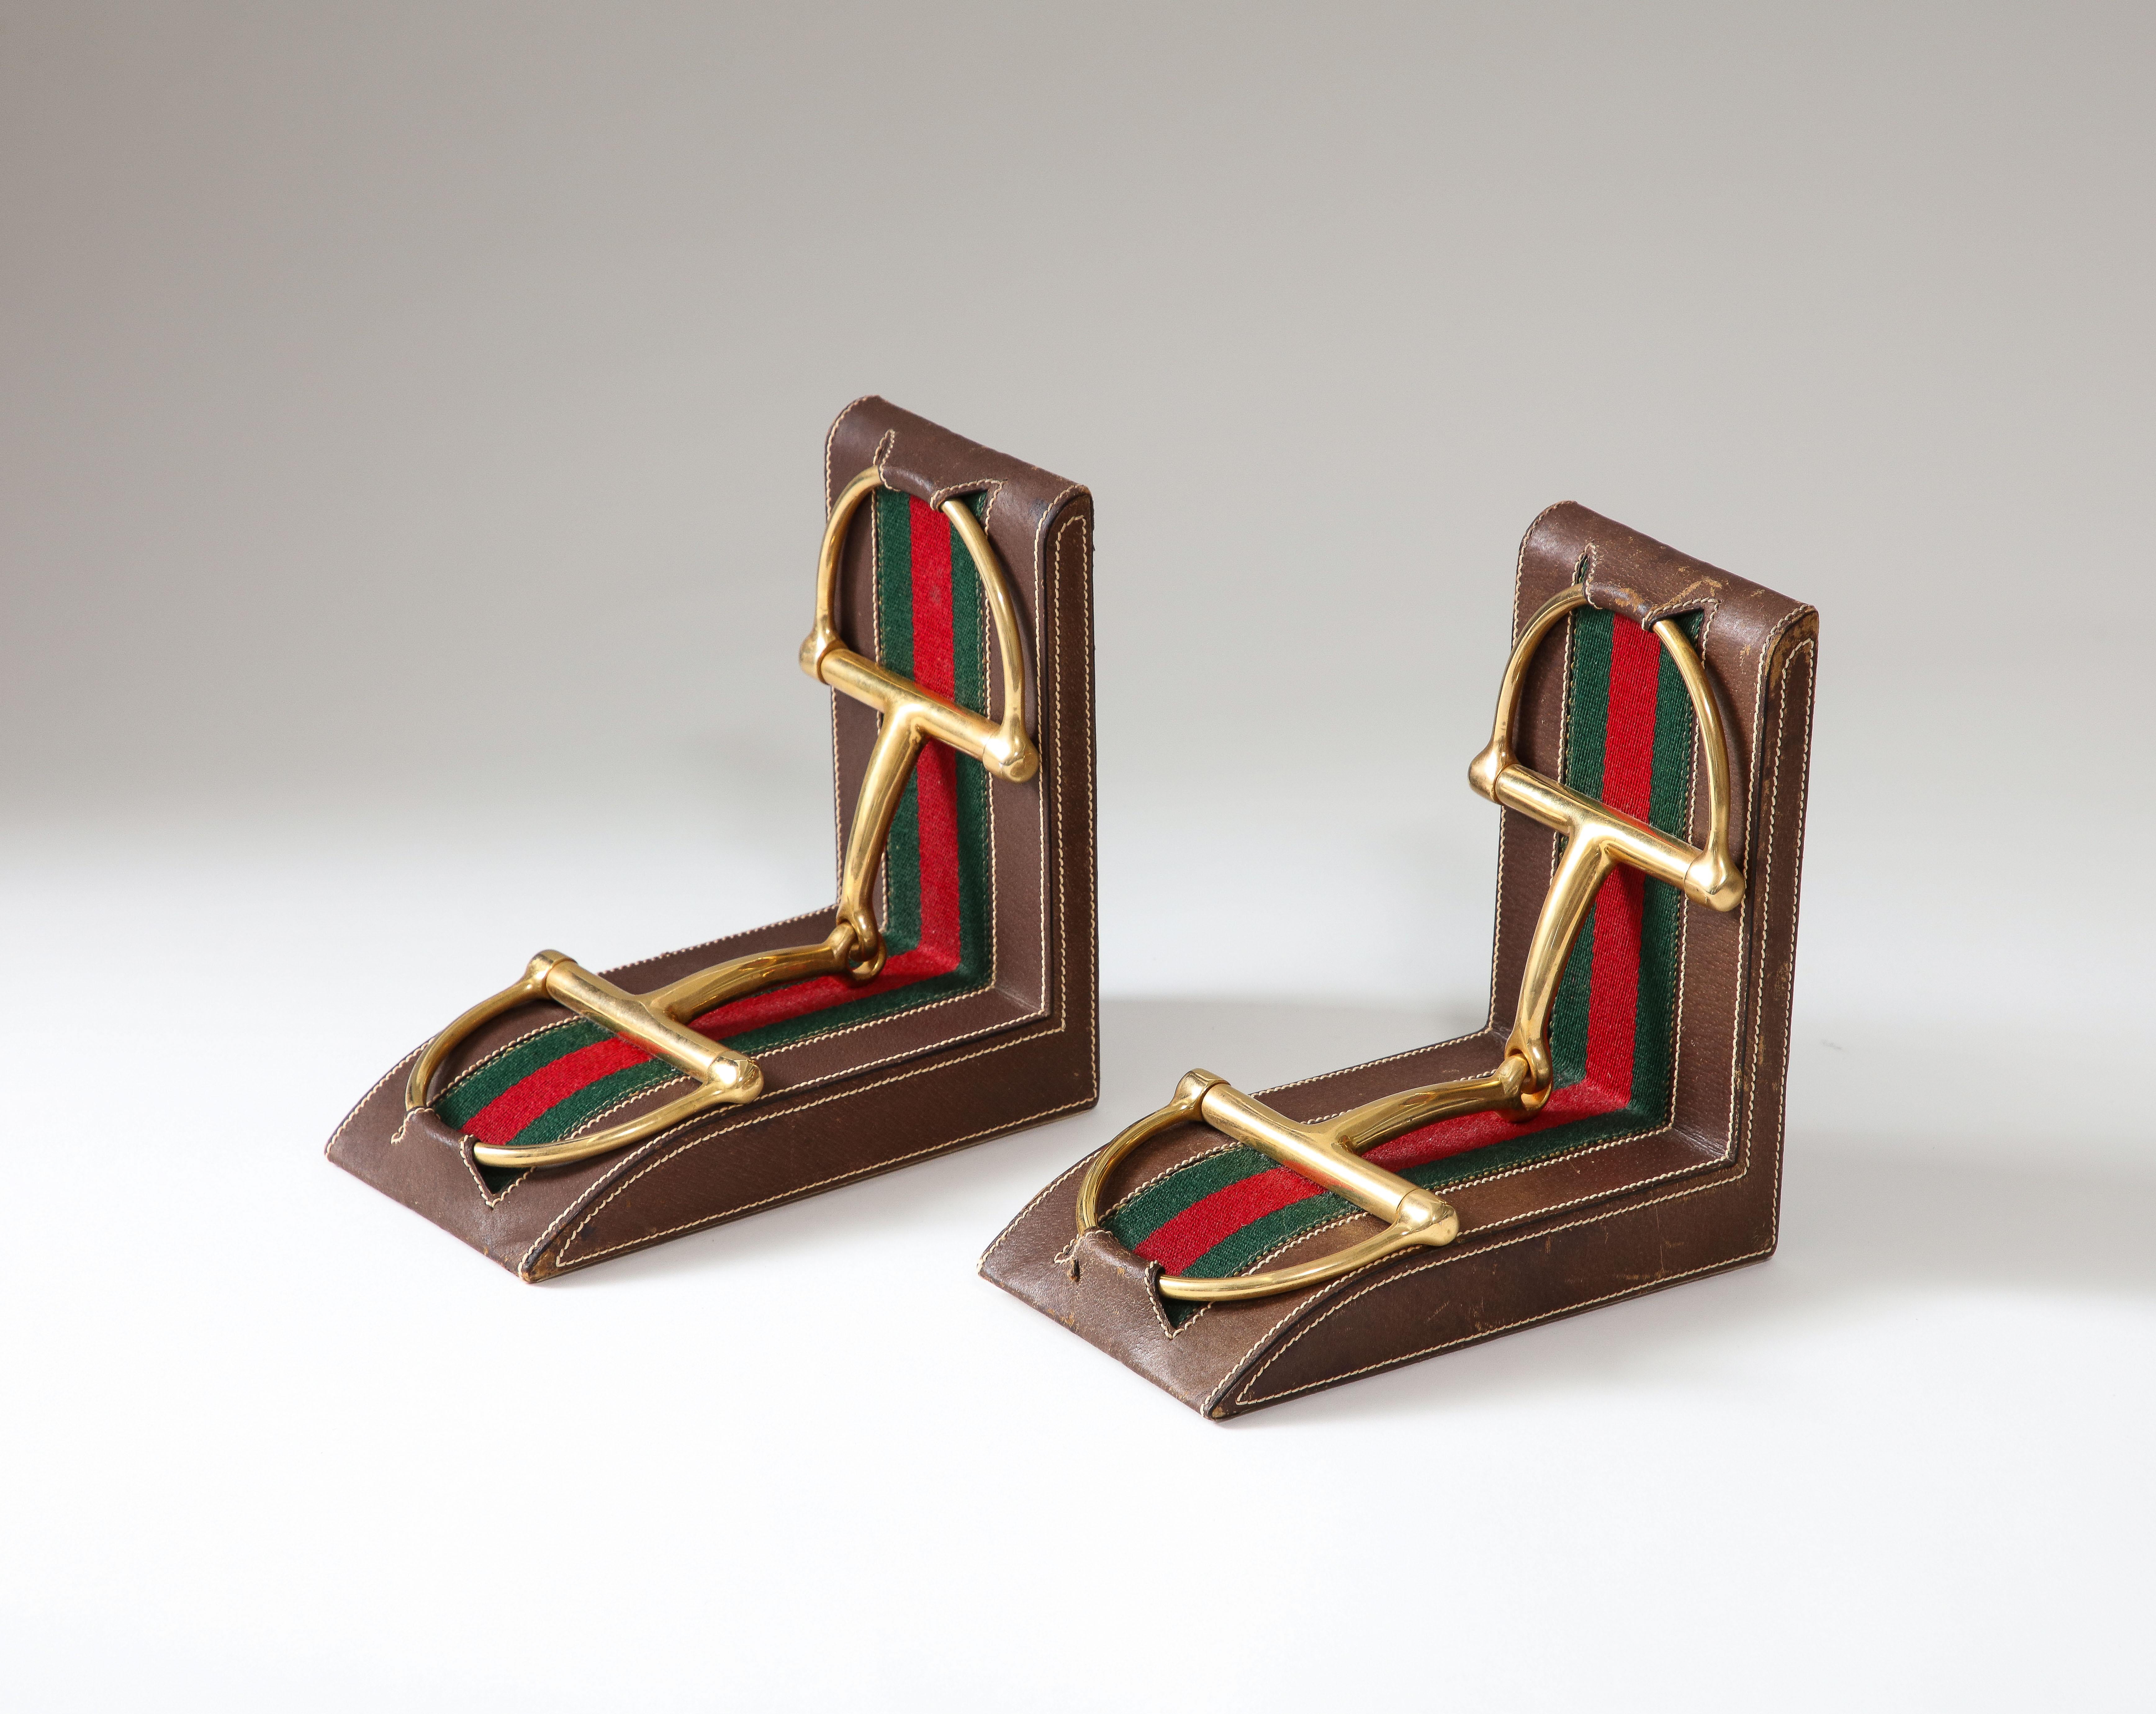 Pair of Leather and Brass Bookends, Gucci, Italy, c. 1970 For Sale 4